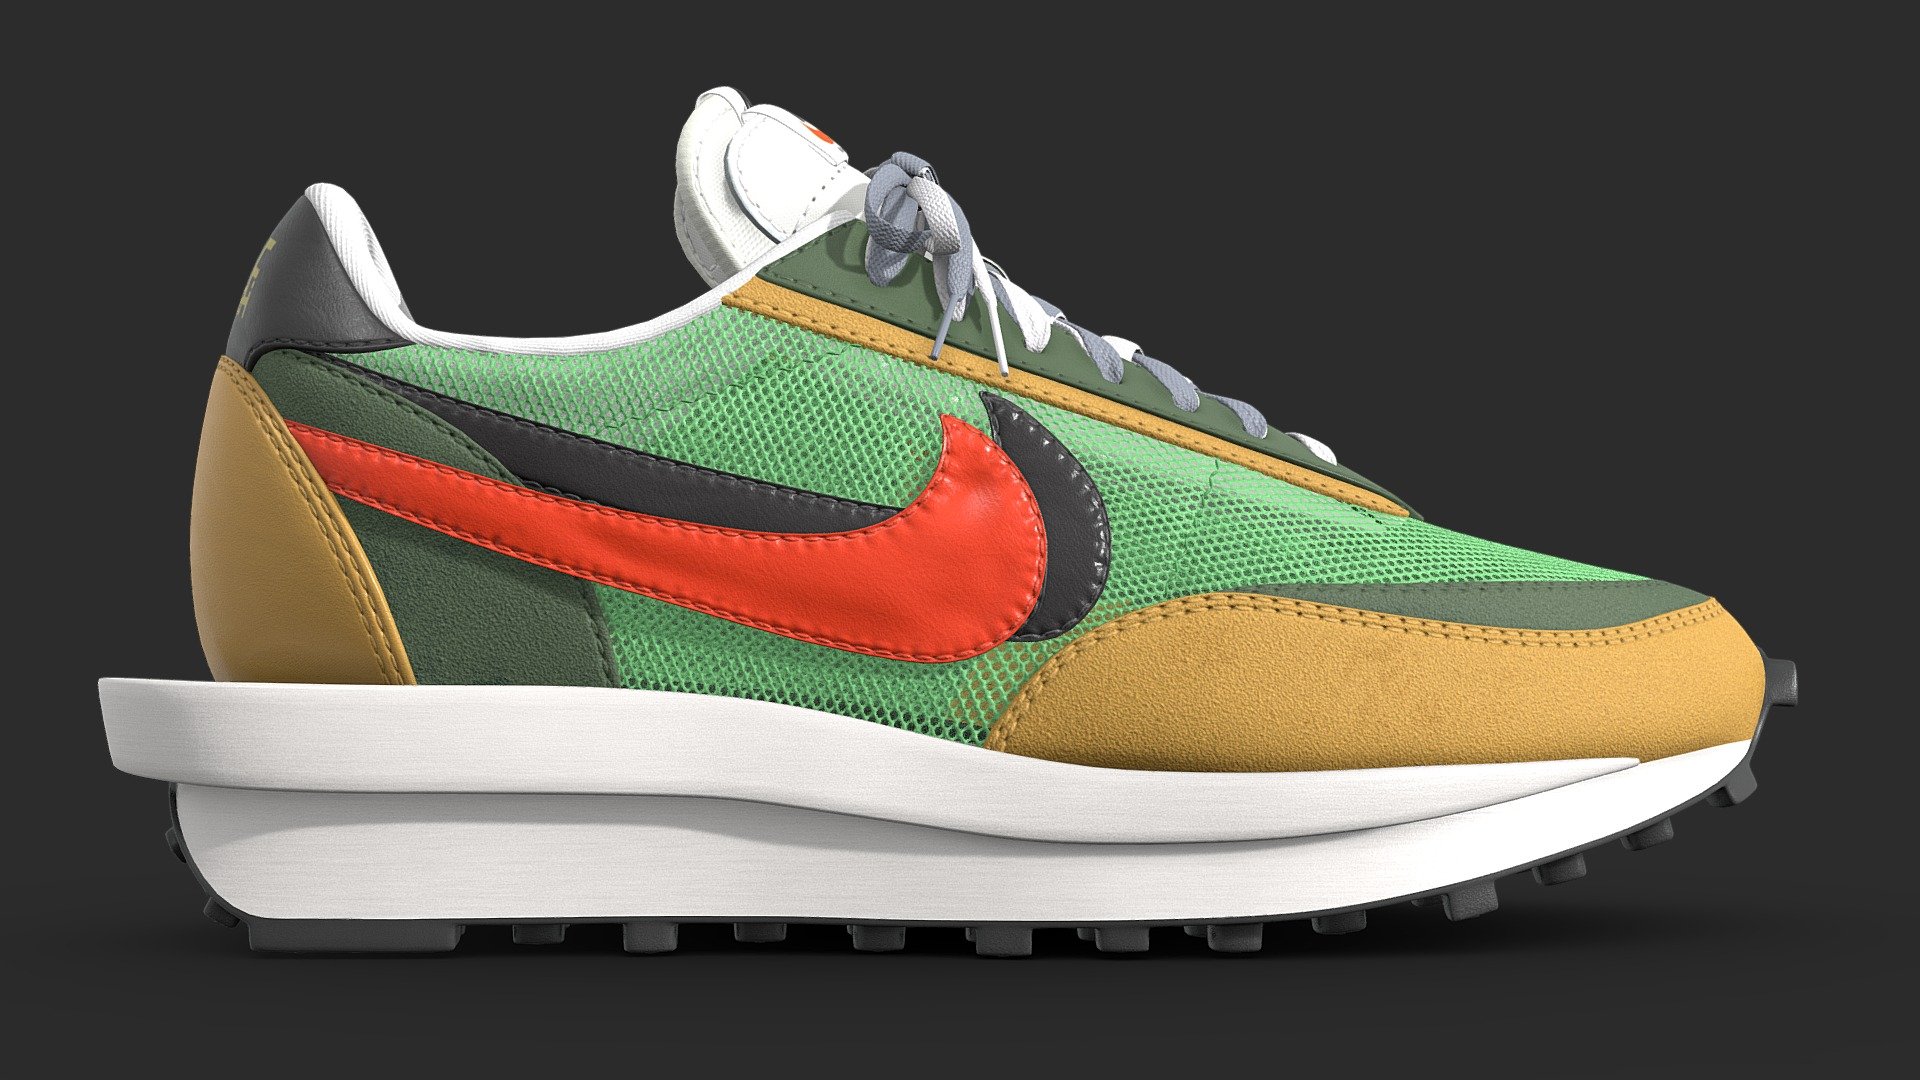 Nike Sacai LD Waffle in the Multi Green Colourway. This is one of the original colourways that released in 2019.

This model is a 1:1 replication of the original. All dimensions, angles, and curves are the same as the real life counterpart. The shoe is subdivision ready with a base polycount of 23,399 polys per shoe. The mesh uses four texture sets, all at 4096x4096 resolution, with the following maps in use: Base Color, Metallic, Roughness, Normal. The base color map contains the transparency information, so plug the alpha of the texture into the alpha channel, or alternatively put the base color texture where the opacity should go

Included is a One Mesh version which uses just 1 texture map per shoe,

The main Blender files contain the full texture setup. The mesh is subdivision ready so you can increase/reduce the subdivision count to achieve your desired look 3d model